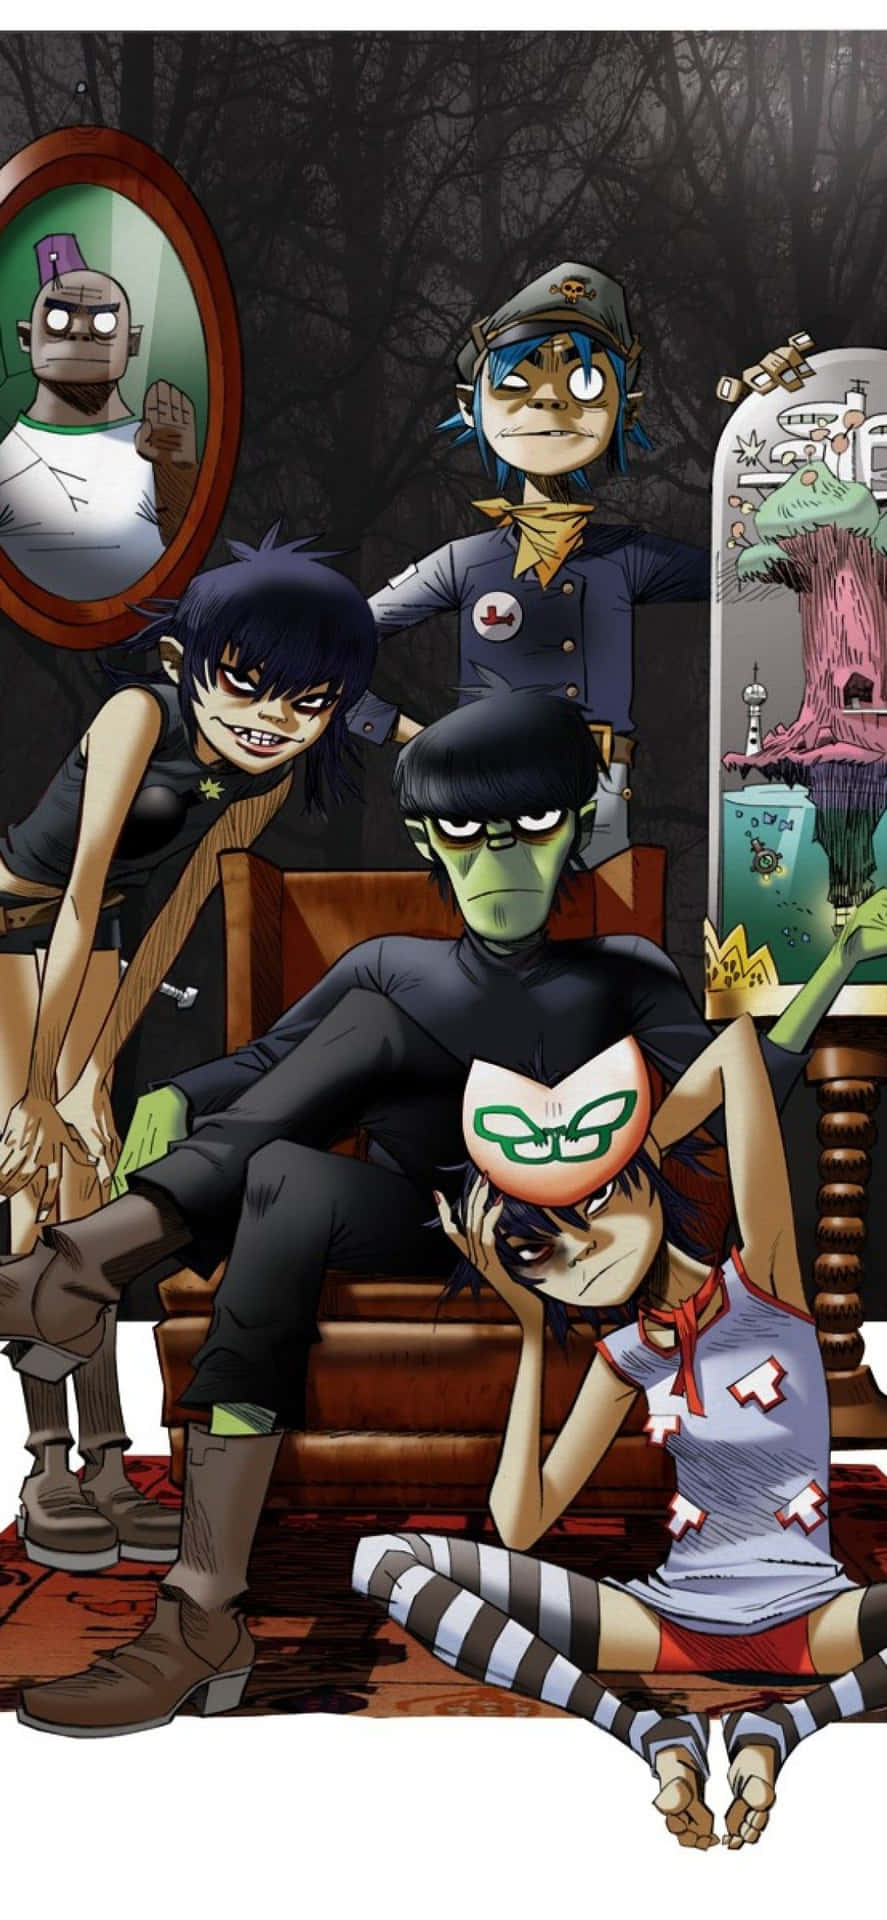 Gorillaz Iphone Fanart With Murdoc At The Center Background